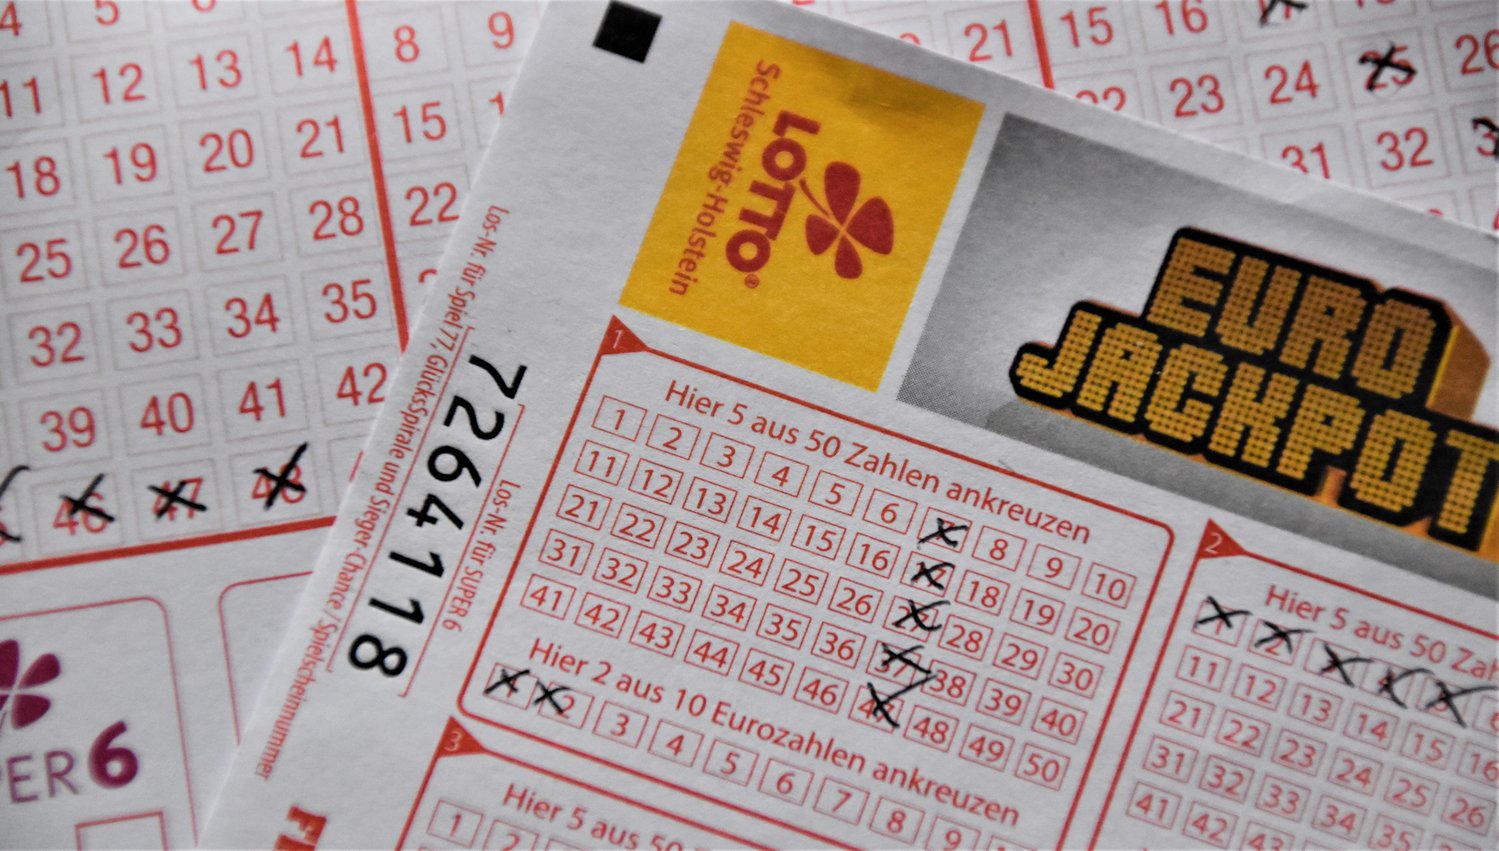 A Katy resident has won a $1million Powerball prize in the Texas Lottery.